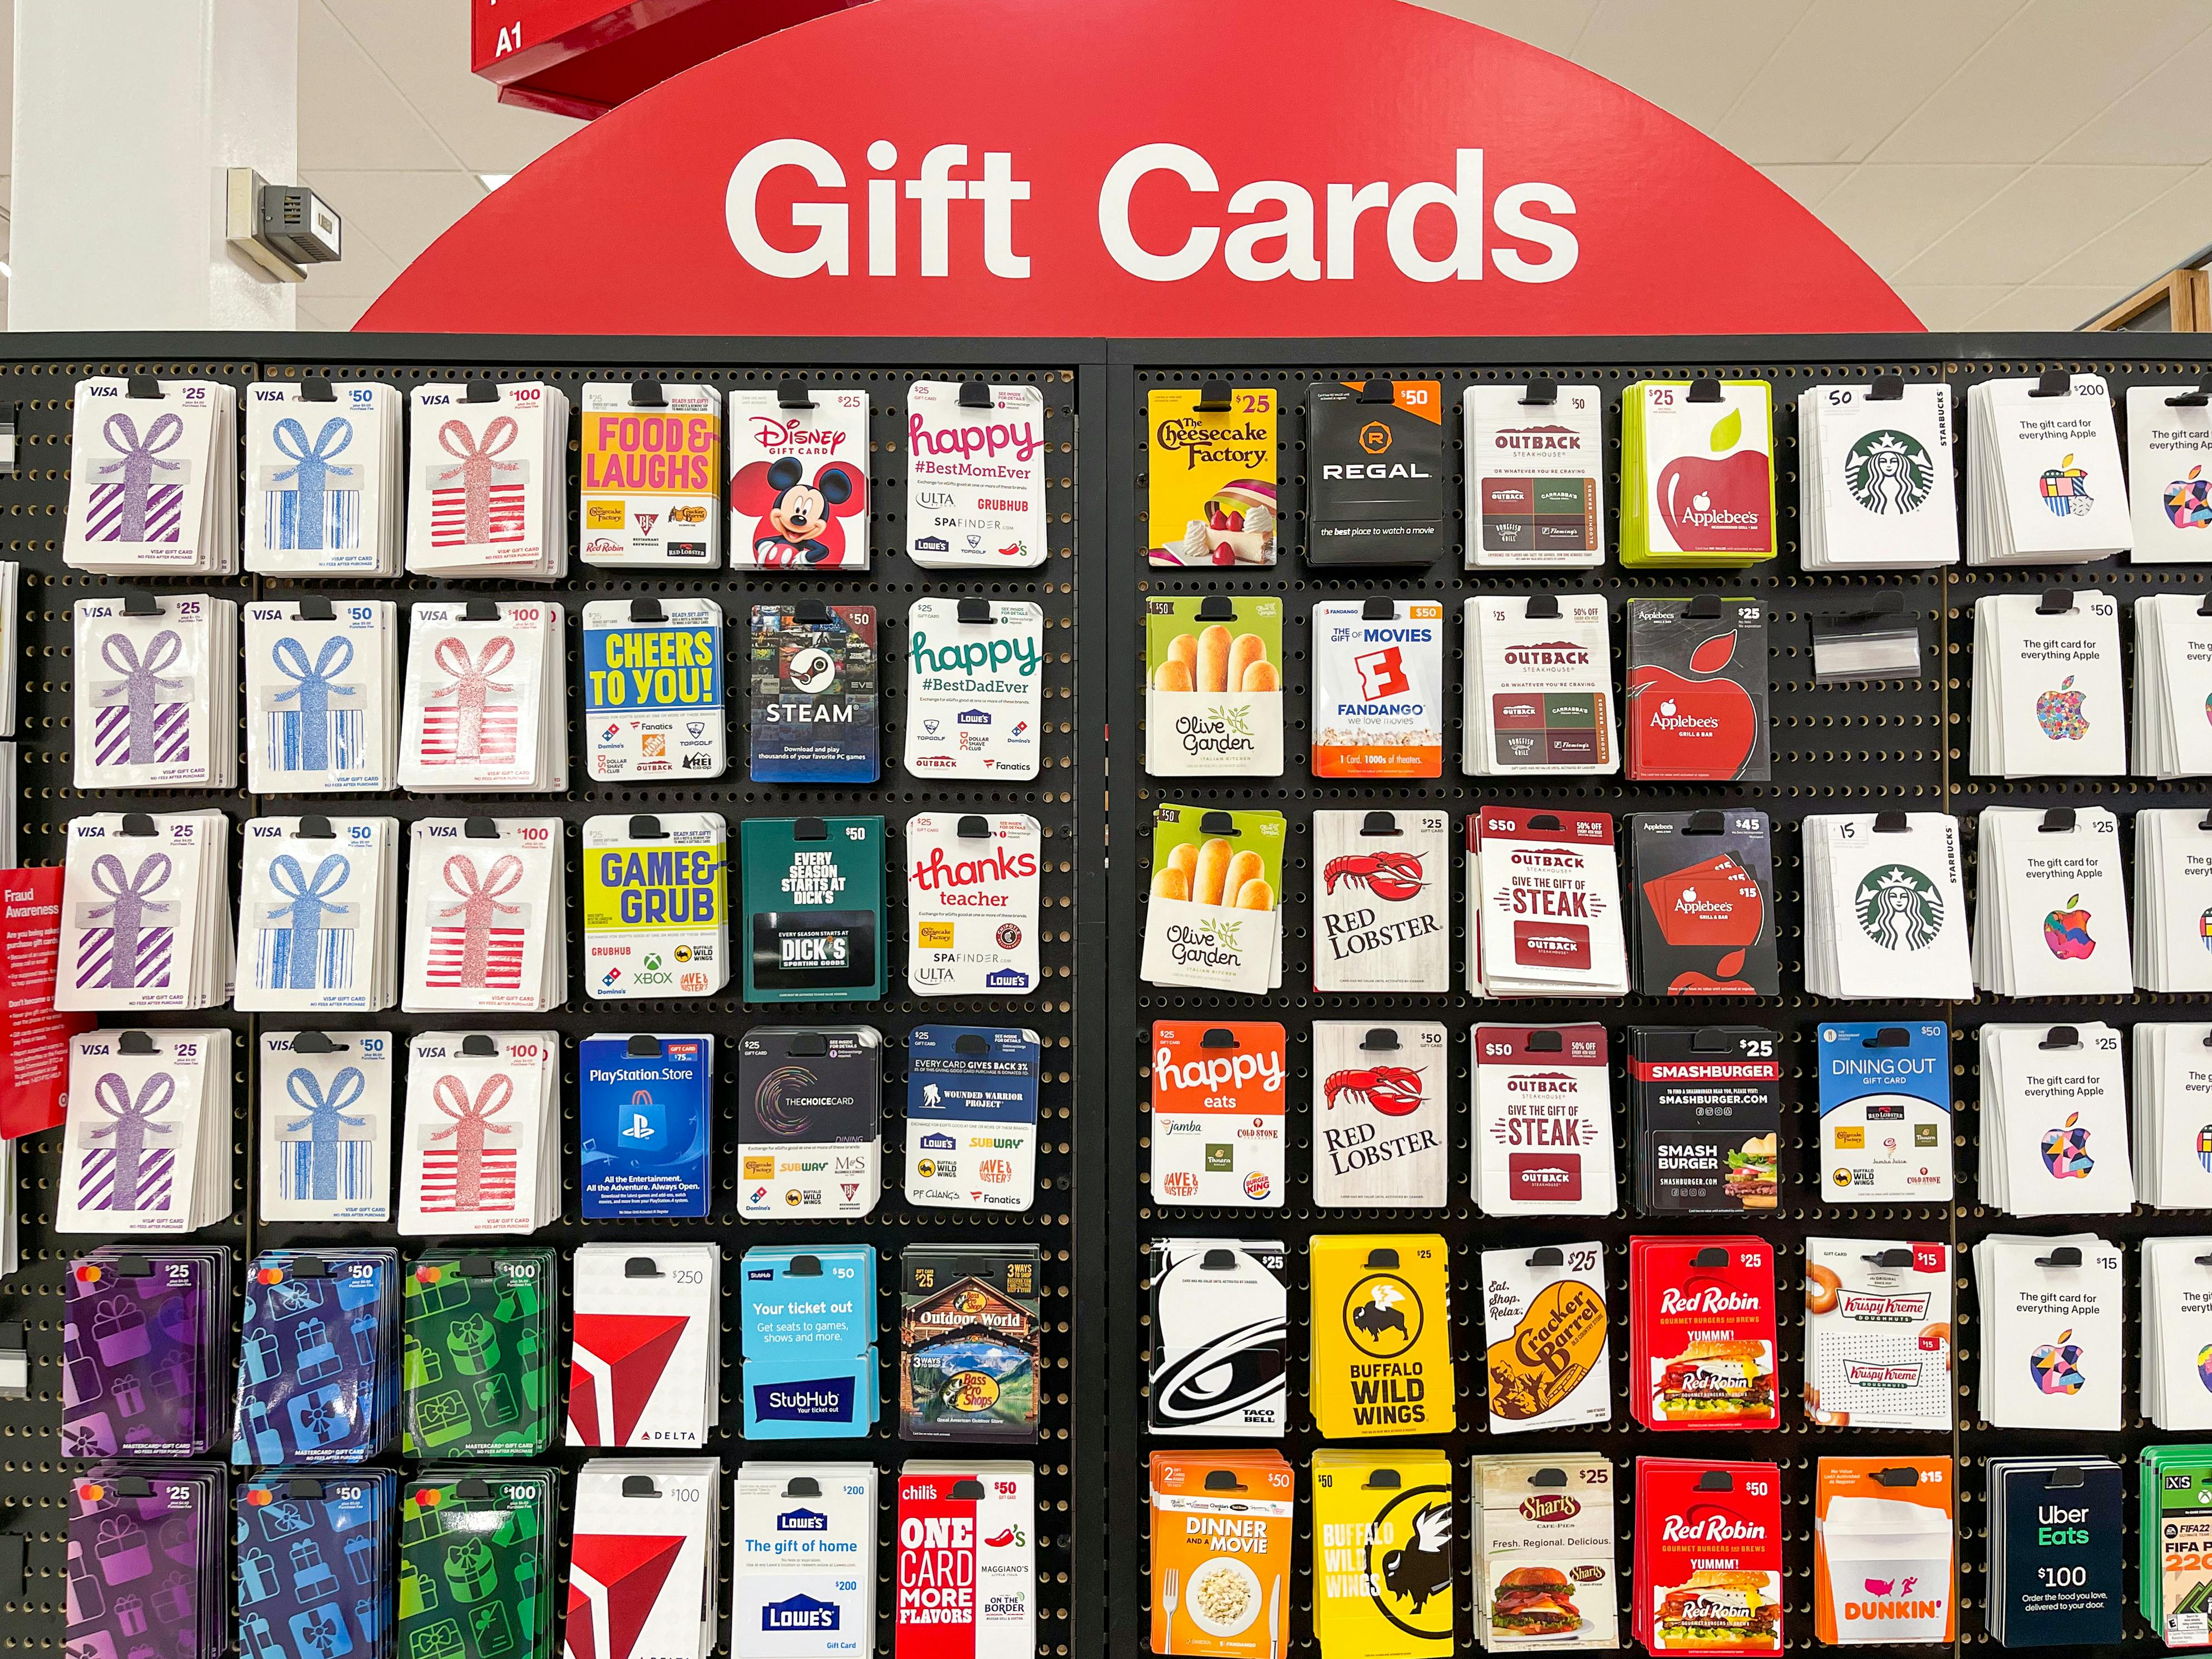 Can I Buy Amazon Gift Cards at Target?